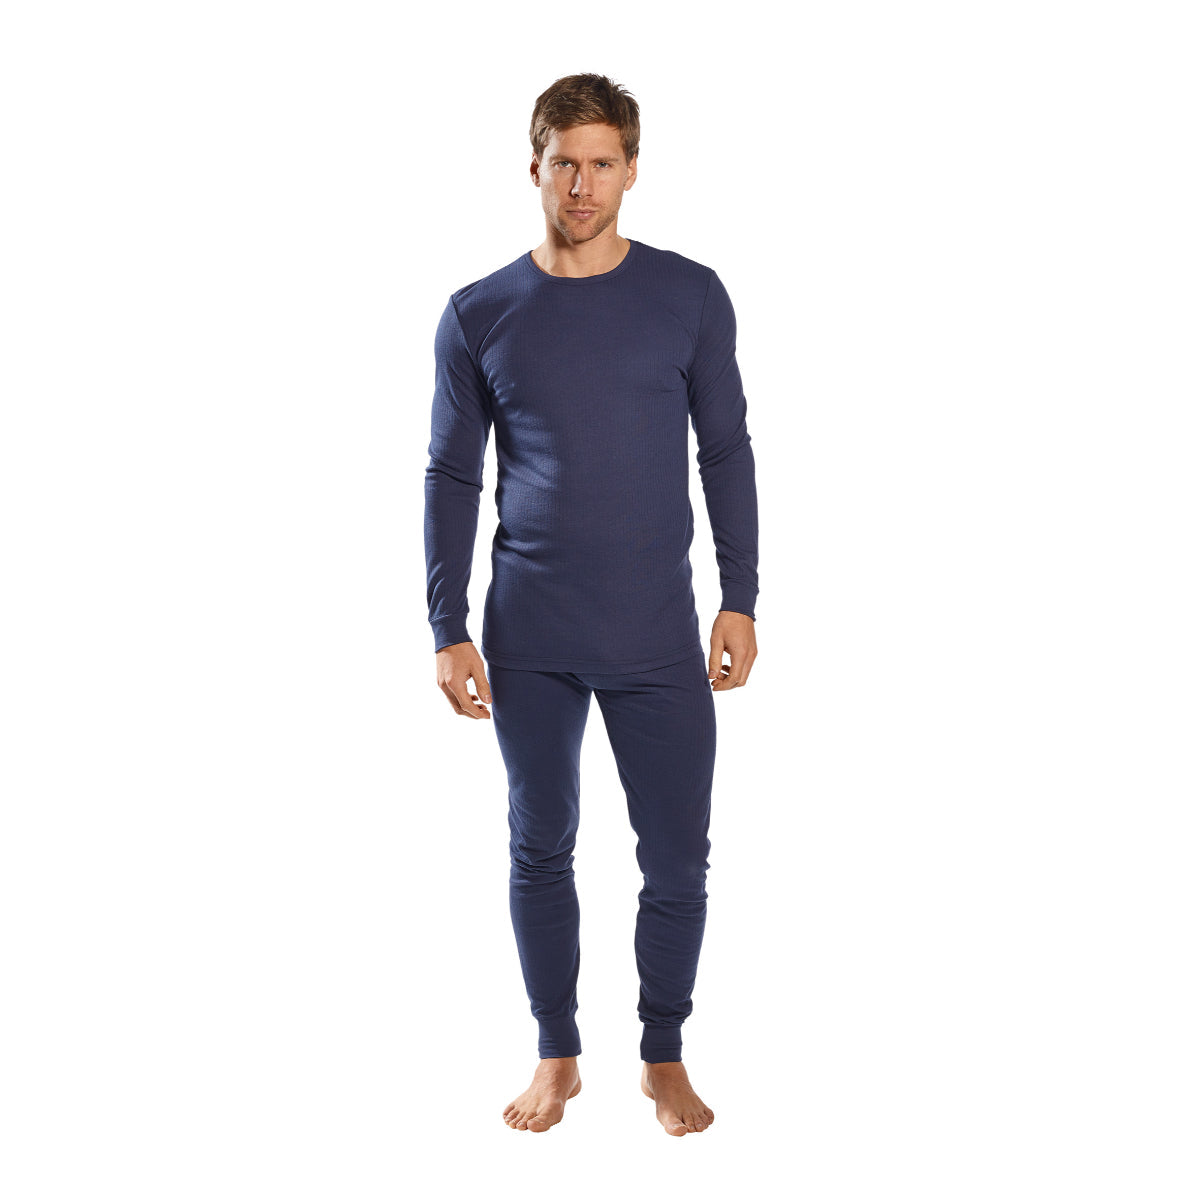 Portwest B123 Thermal T-Shirt Long Sleeve for Baselayer